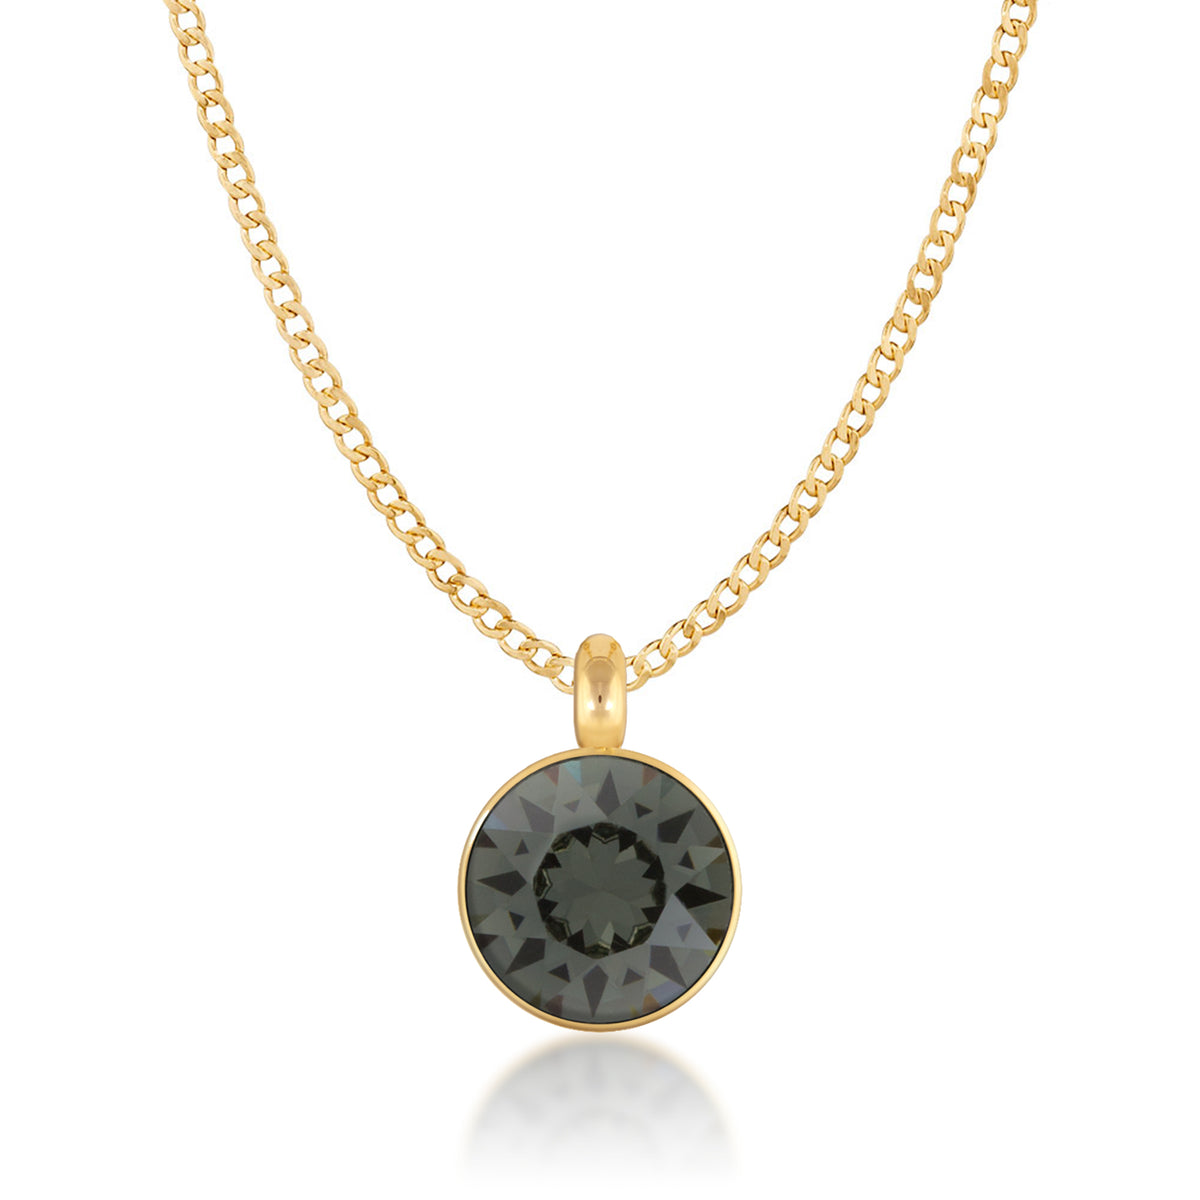 Bella Pendant Necklace with Black Diamond Round Crystals from Swarovski Gold Plated - Ed Heart